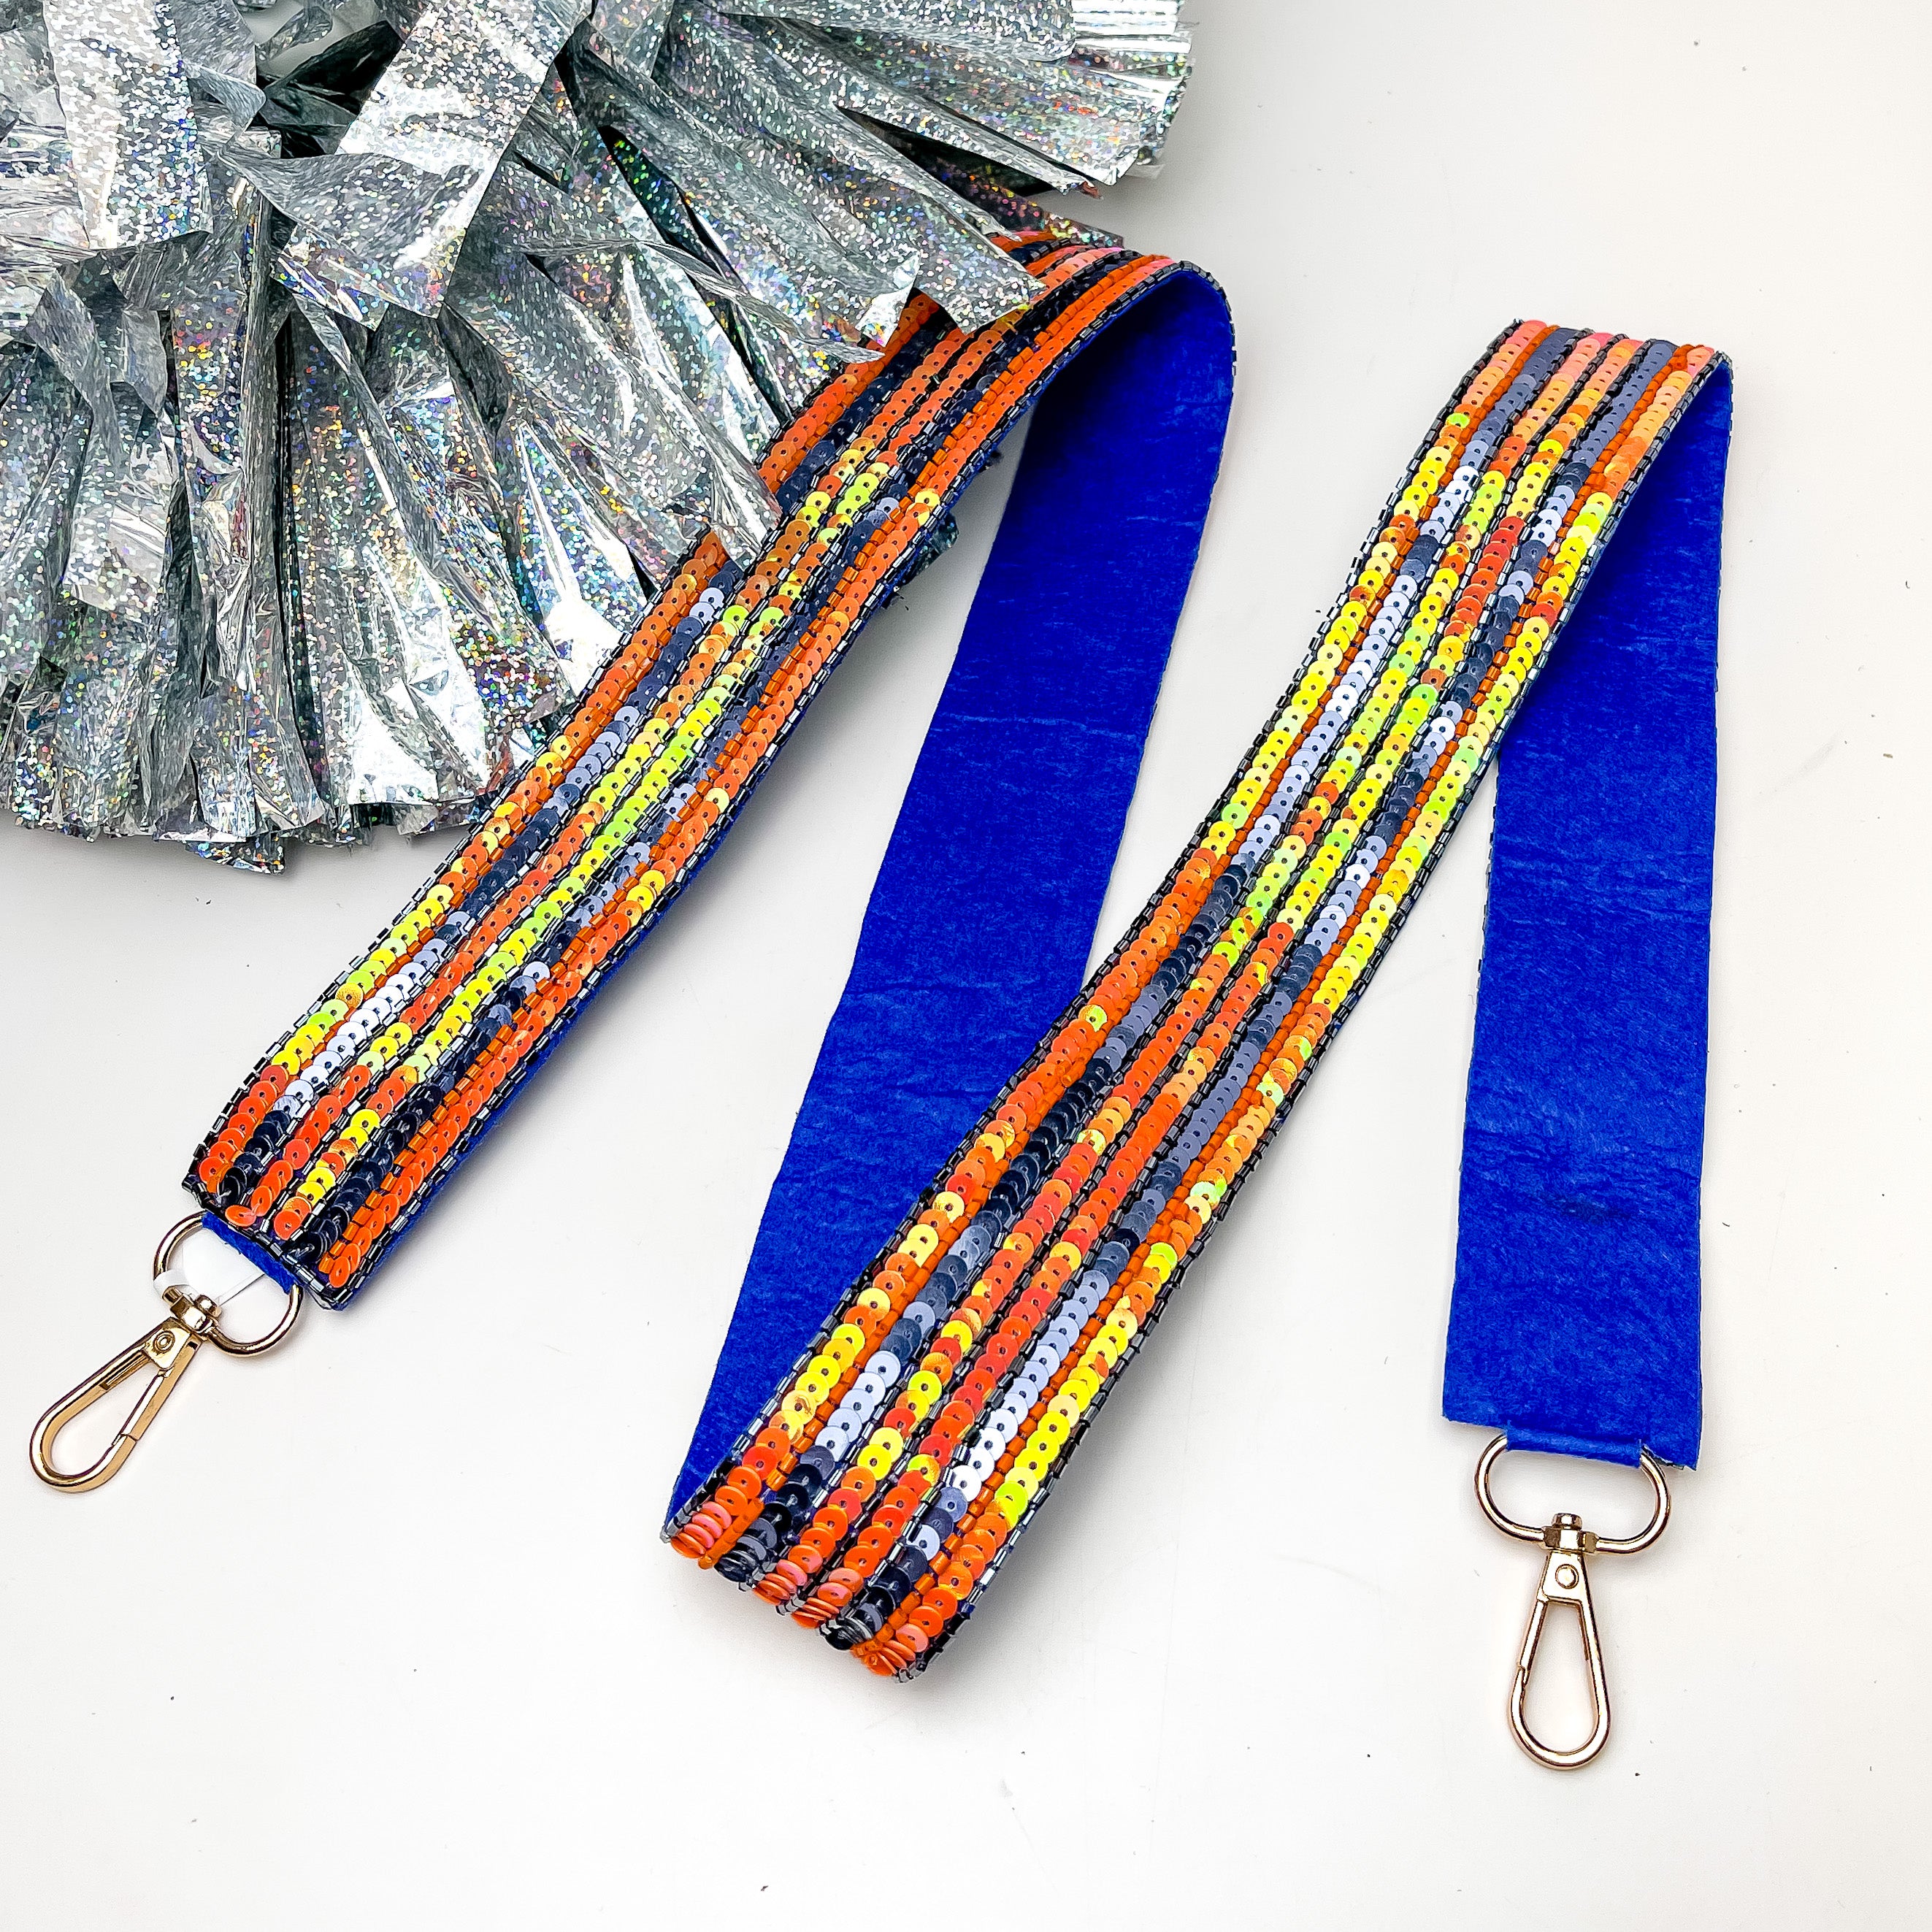 Game Day! Stripped Beaded Purse Strap in Orange and Blue. This purse strap is pictured on a white background with a silver pom pom next to it.